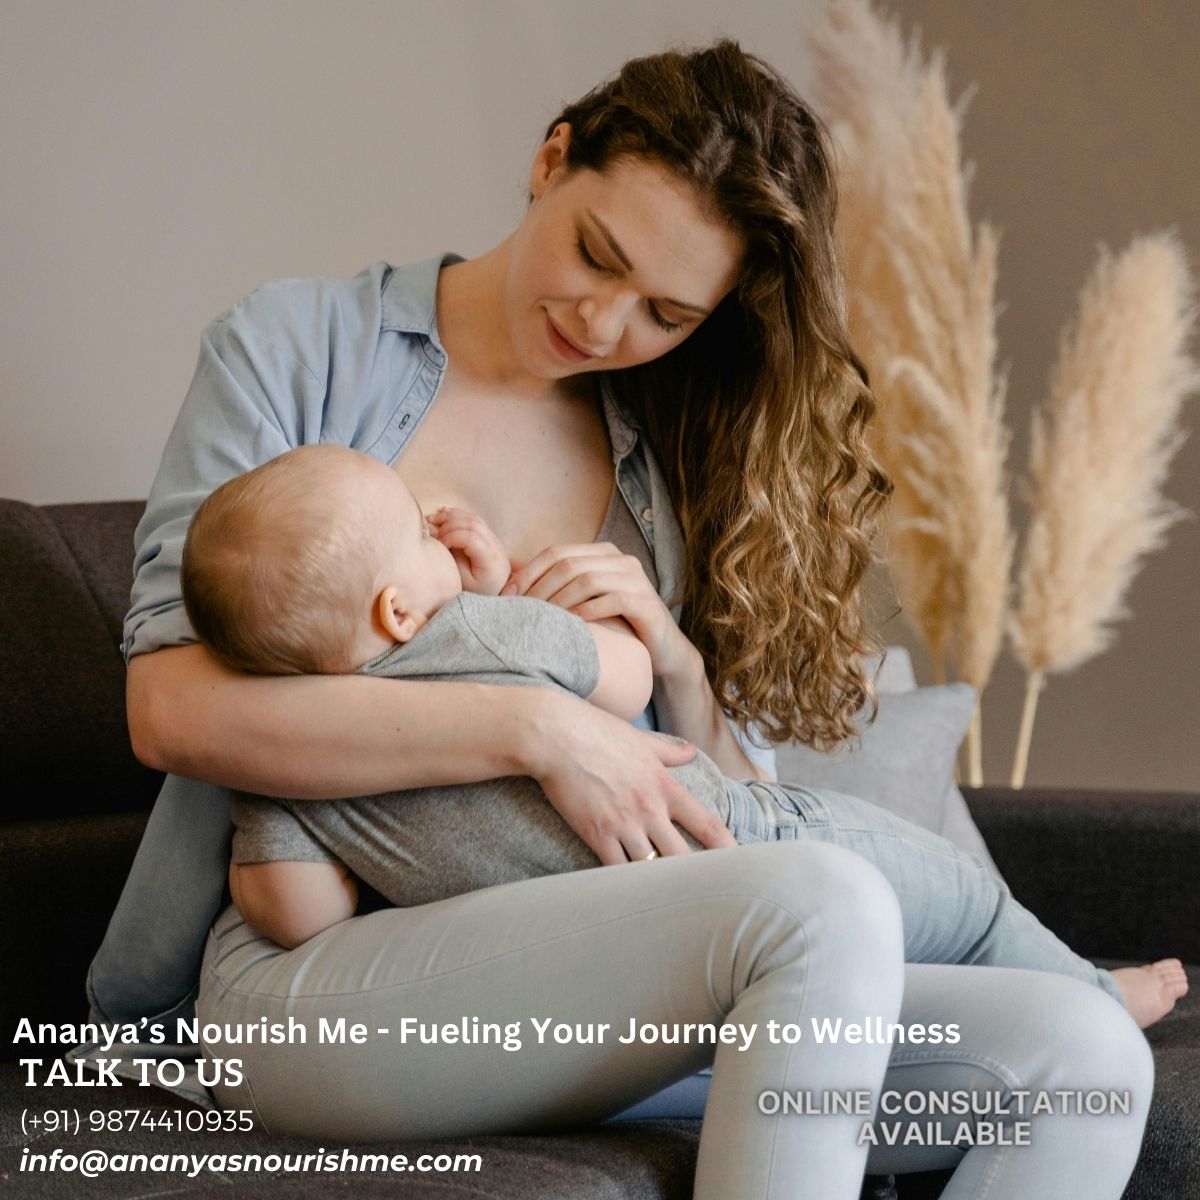 Calling all breastfeeding moms! Boost your milk supply with these lactation-friendly foods:
Oats
Nuts and Seeds
Lactation Cookies
Eggs
Fruits
Leafy Greens
Fatty Fish
Remember to stay hydrated and eat a balanced diet #LactationFoods #BreastfeedingTips #momlife #ananyasnourishme